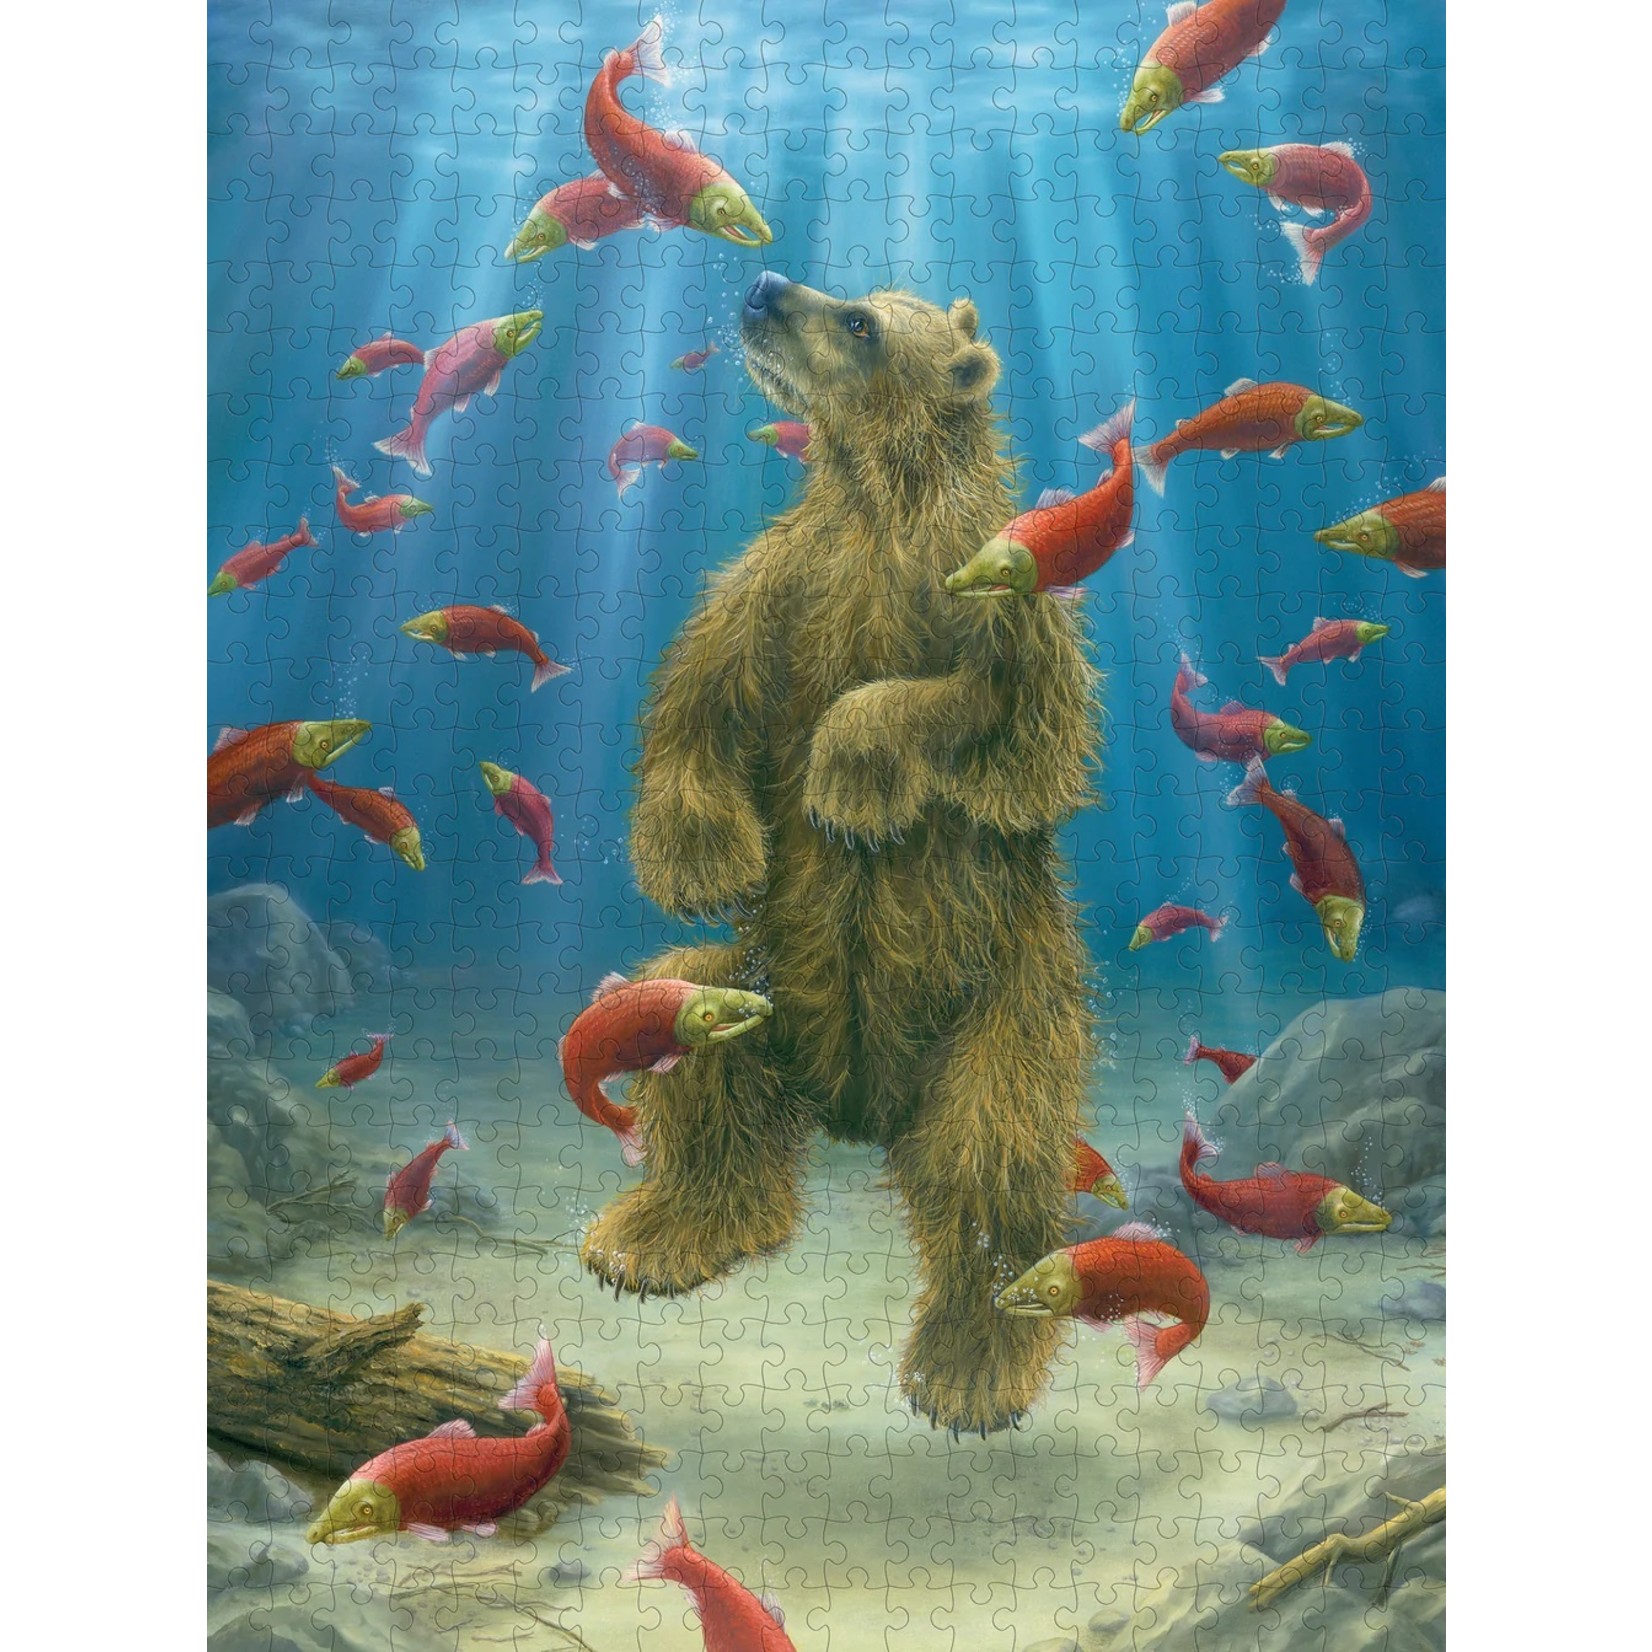 Robert Bissell: The Swimmer 500pc